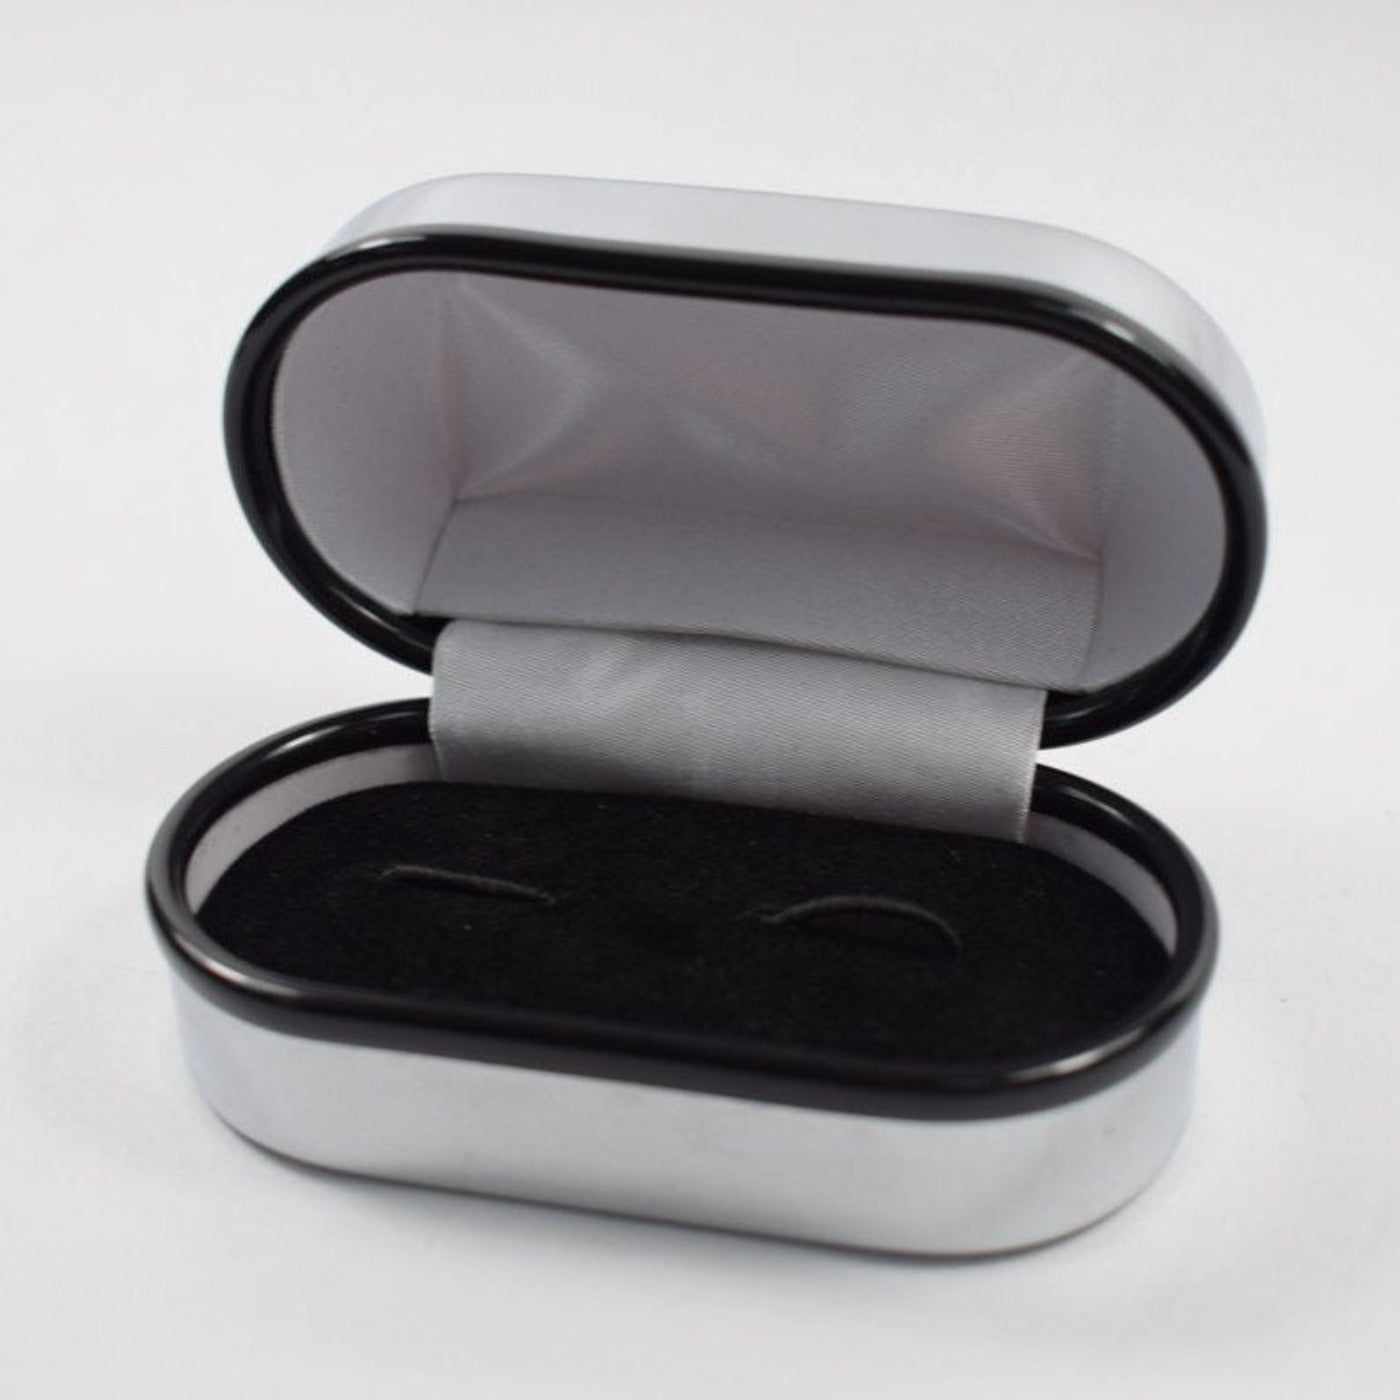 Personalised Engraved Chrome Cufflink Box/Case - Wedding, Birthday, Fathers Day - The Perfect Place To Store His Favourite Cufflinks